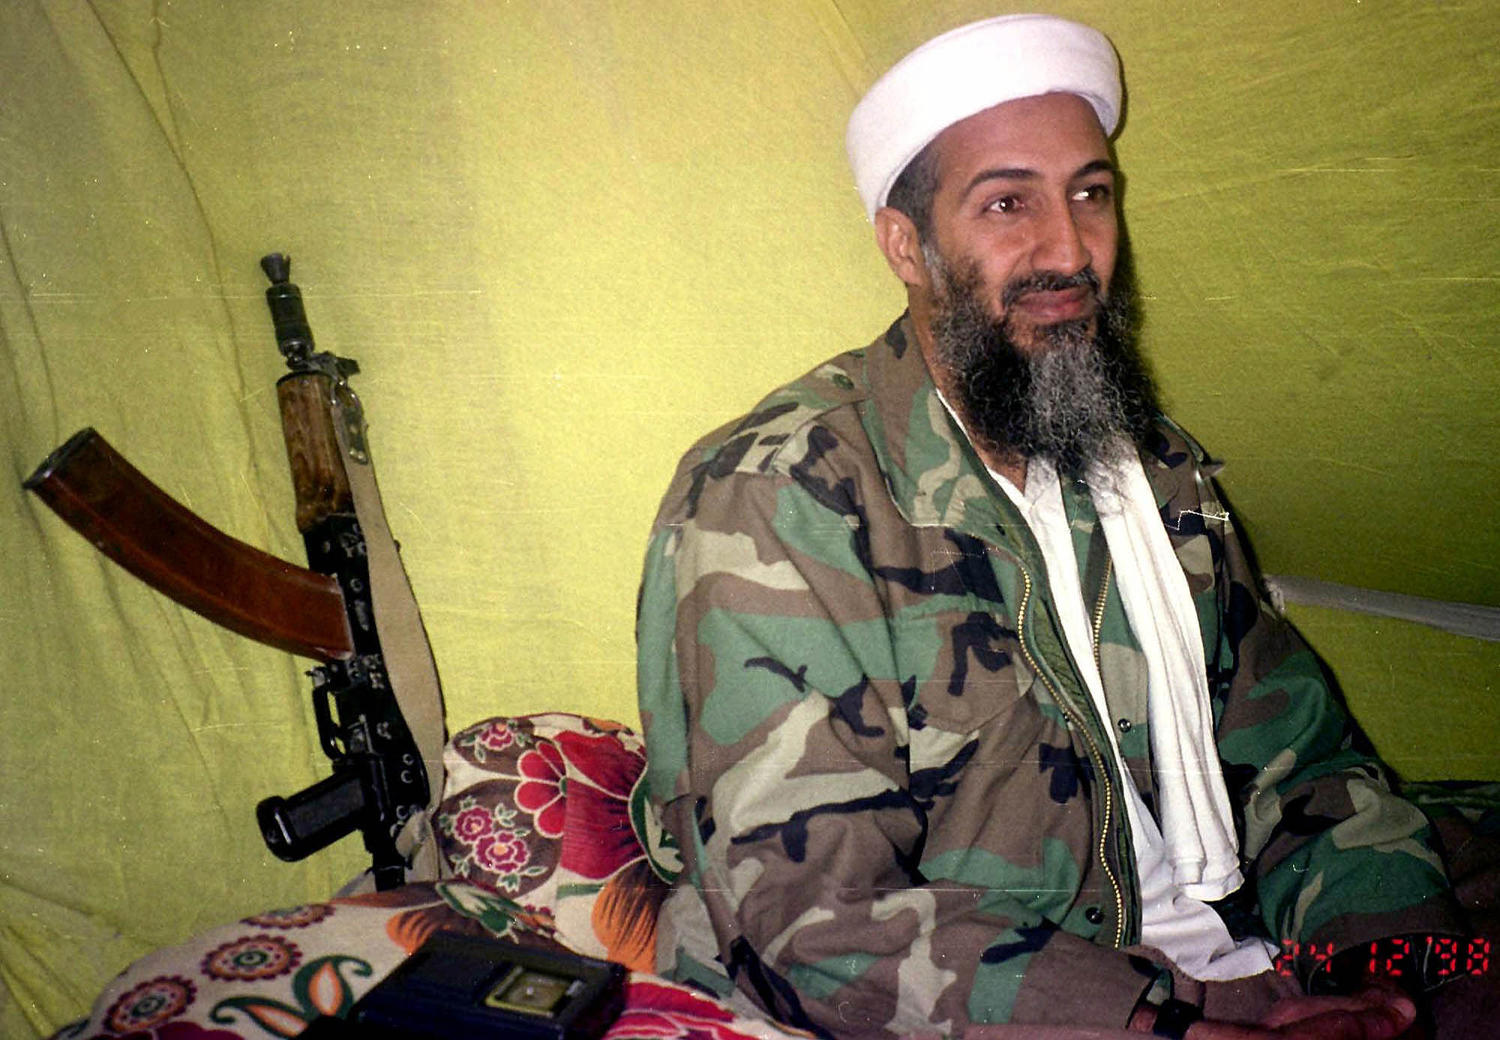 TikTok removes hashtag for Osama bin Laden’s ‘Letter to America’ after viral videos circulate